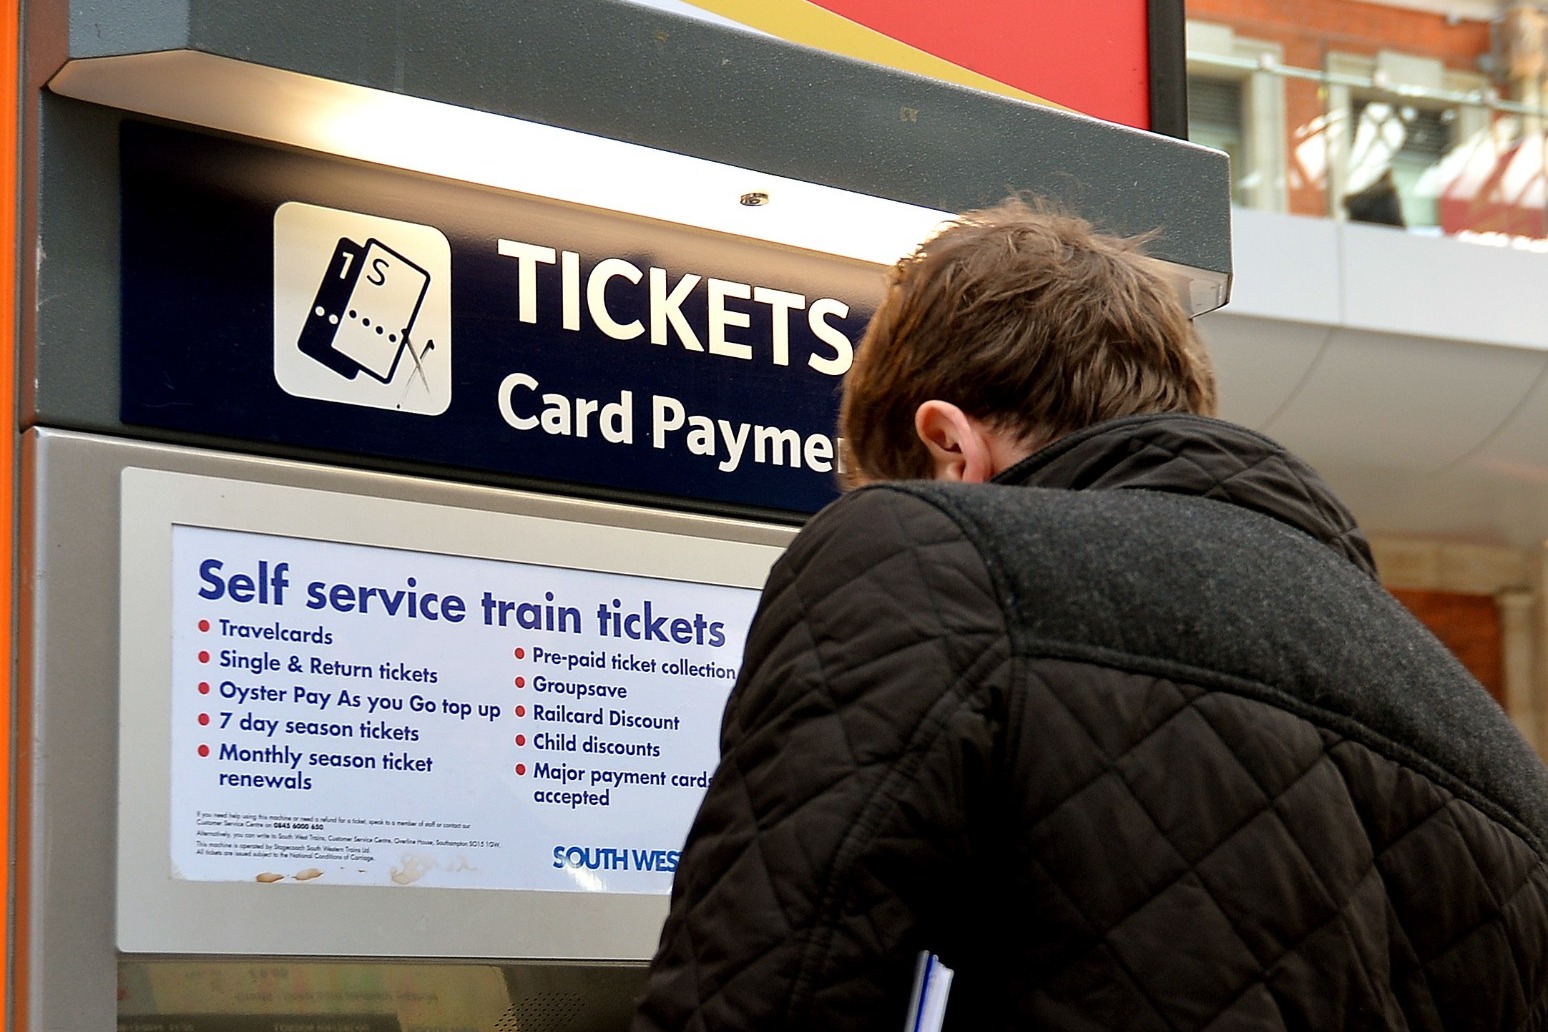 Train companies suffer glitch accepting card payments for tickets 